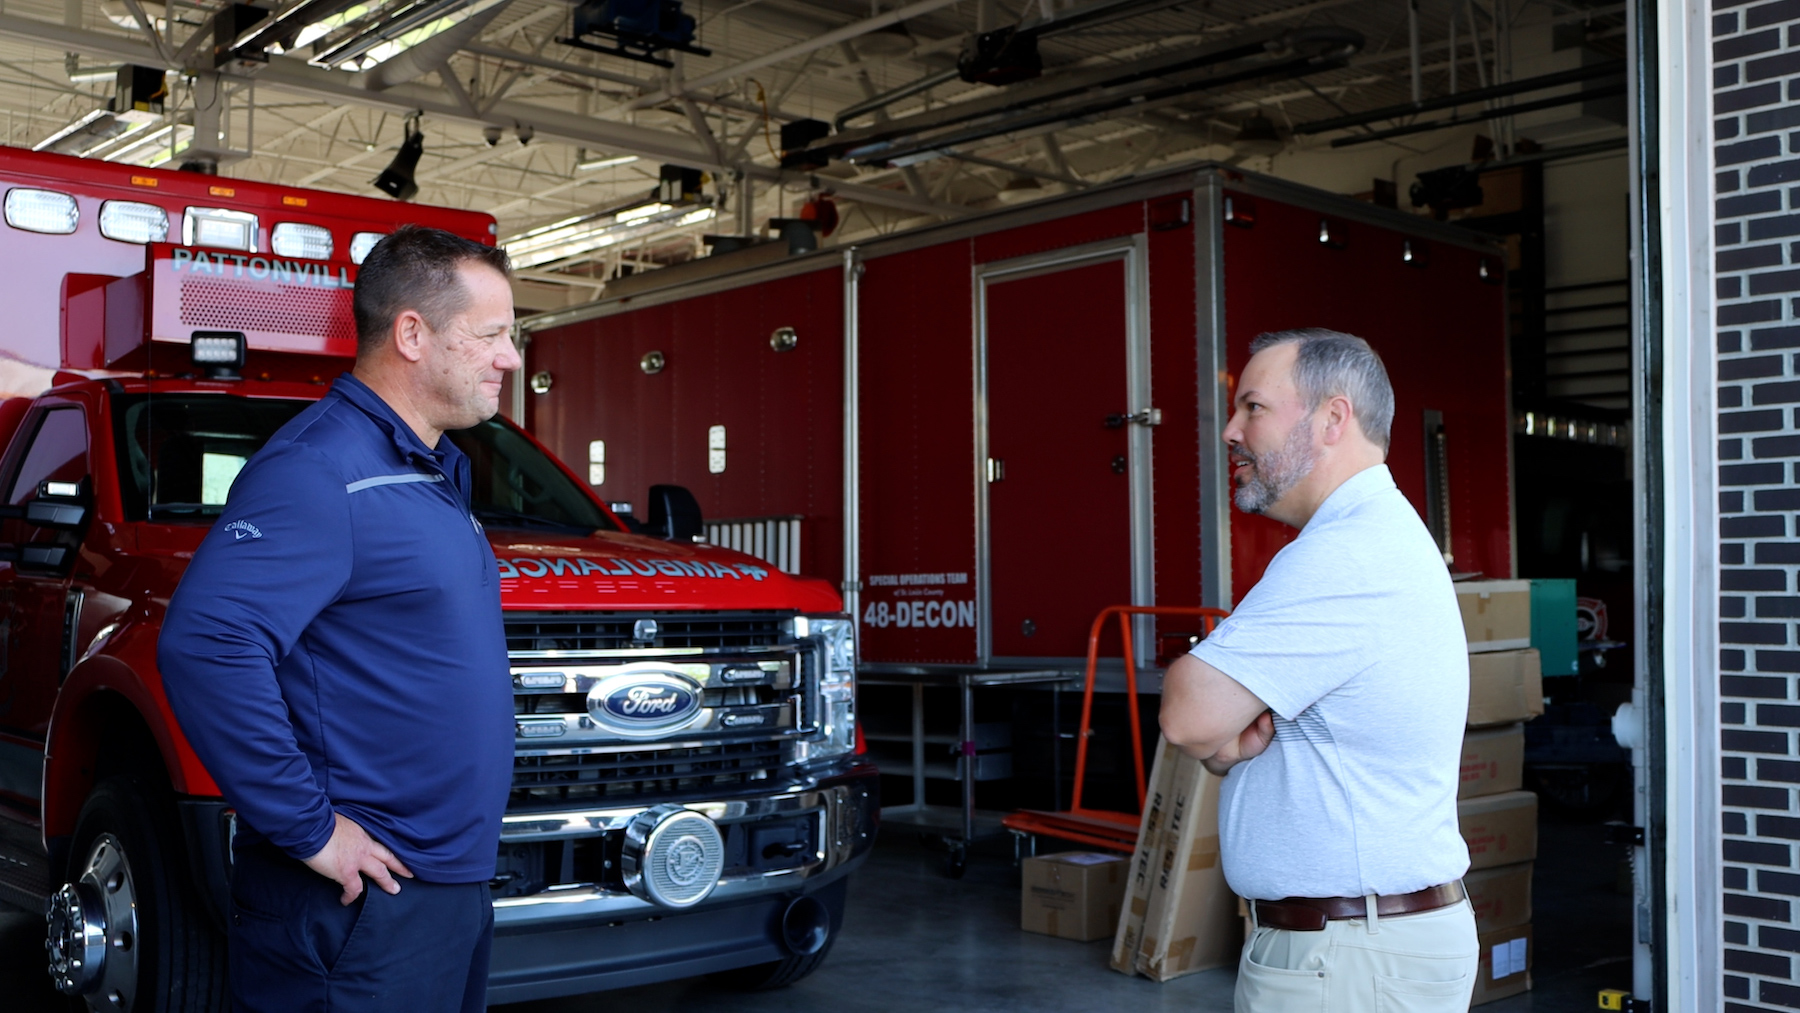 Roland Thomas, CFO of FSI, talking with Corey Irelan, Deputy Chief of Operations and Training for Pattonville Fire District